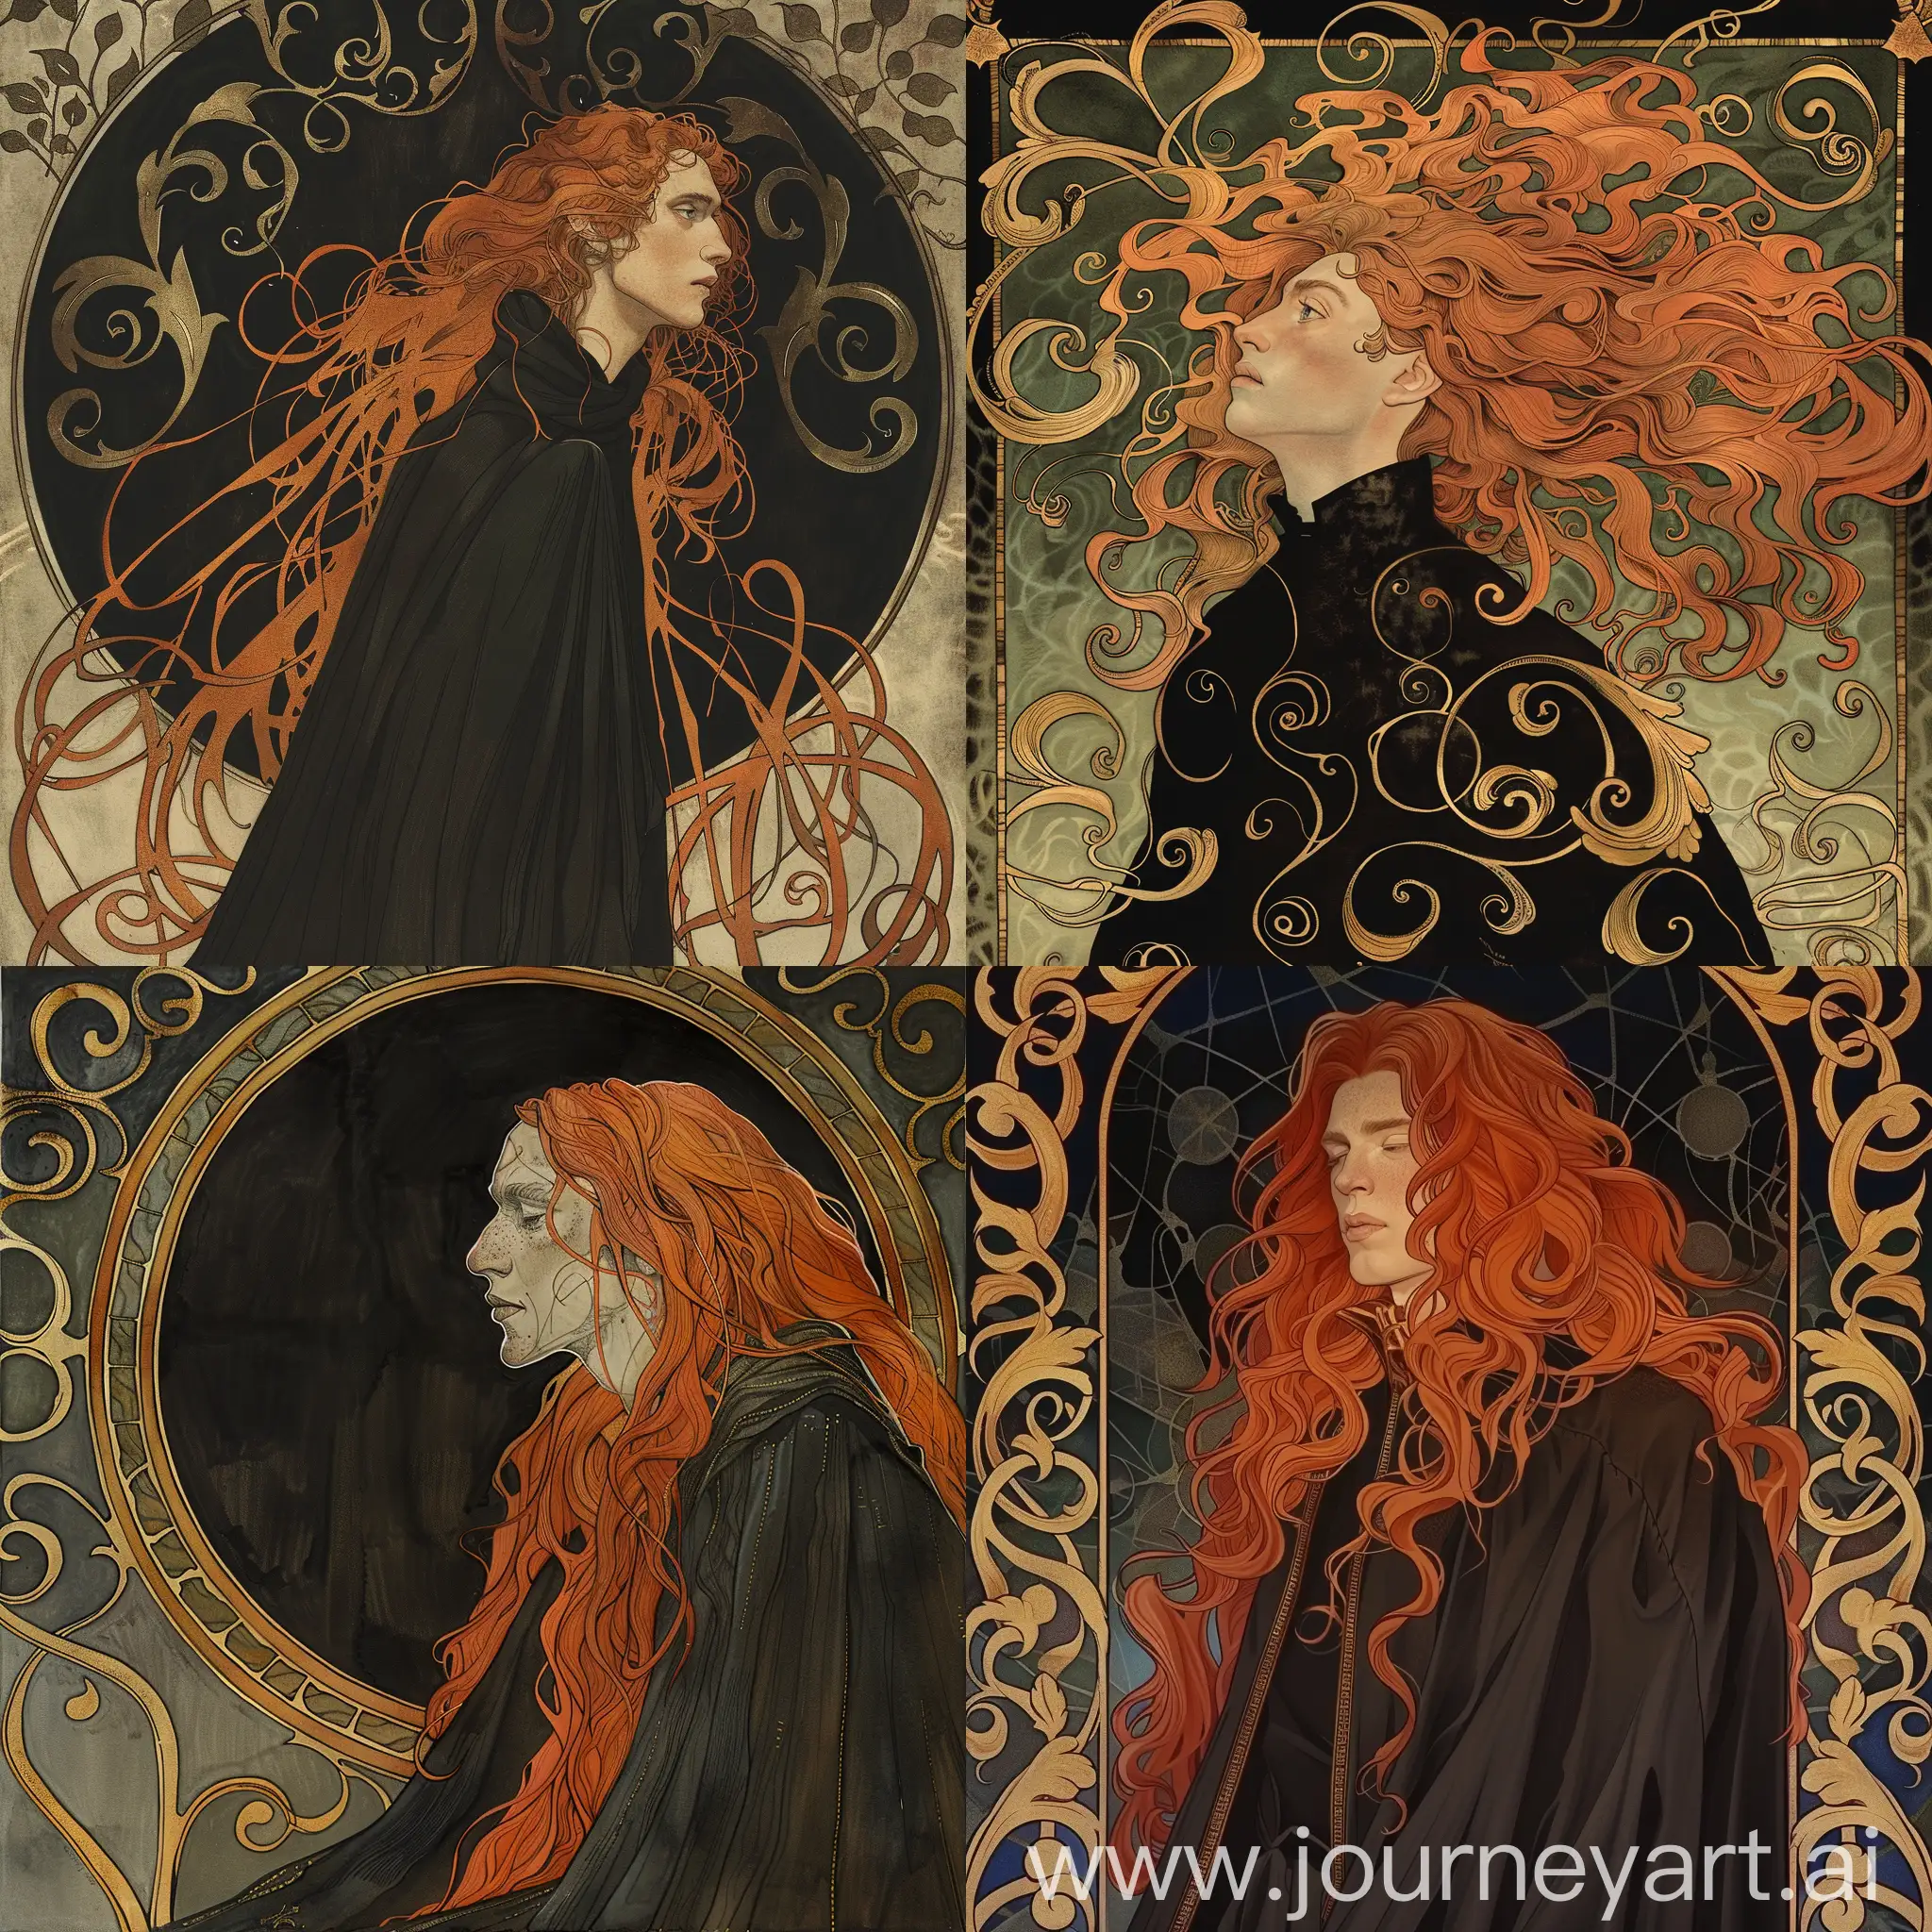 Mysterious-Man-with-Long-Red-Hair-in-Dark-Mantle-Art-Nouveau-Illustration